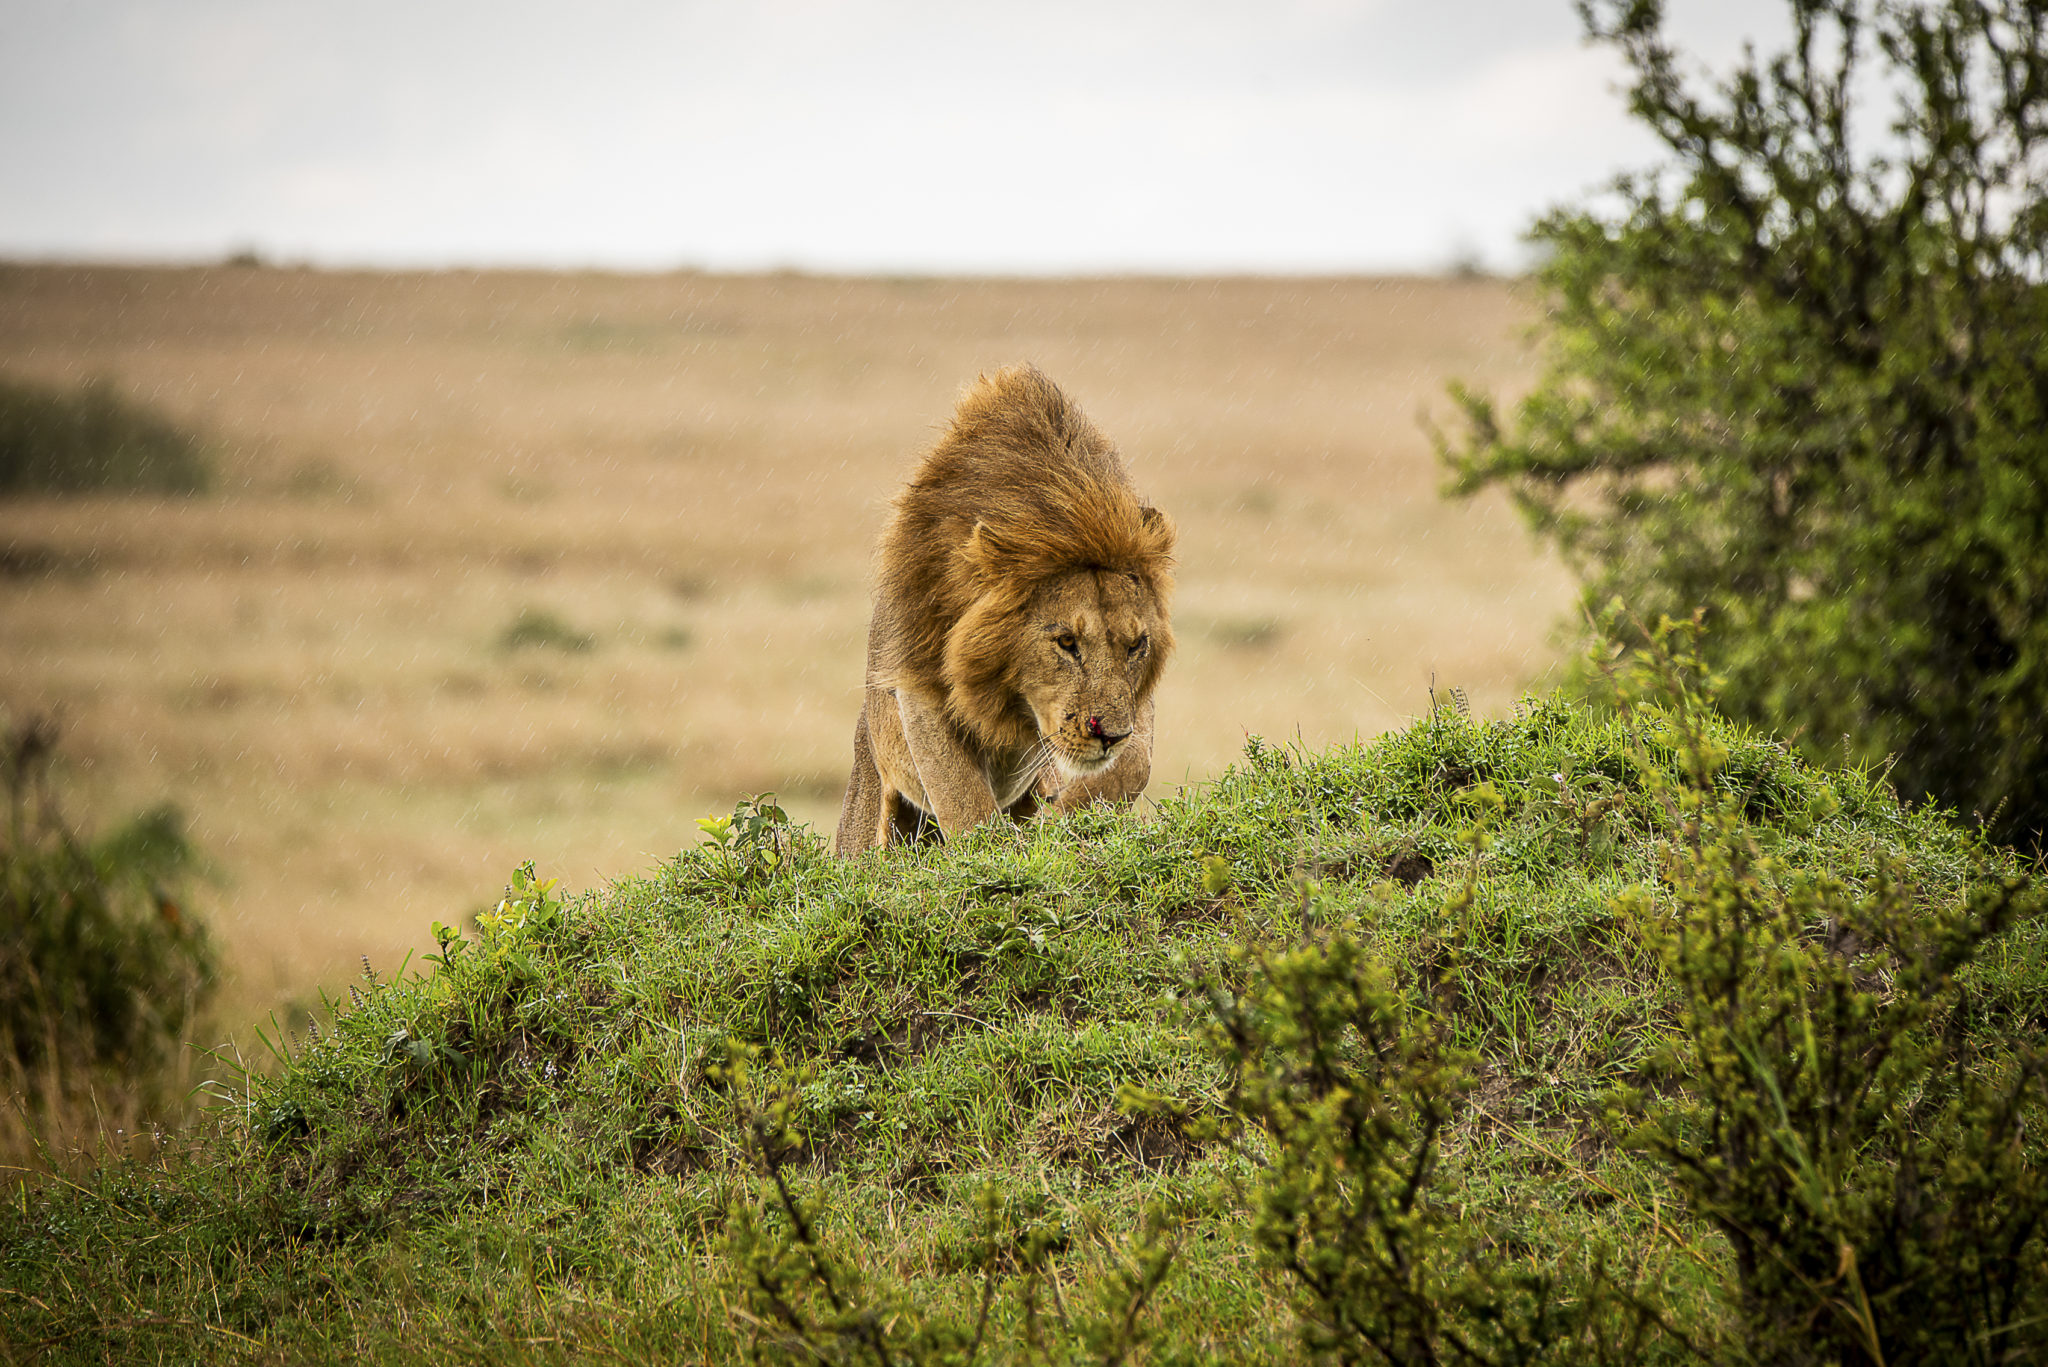 King on the hill – Kenia